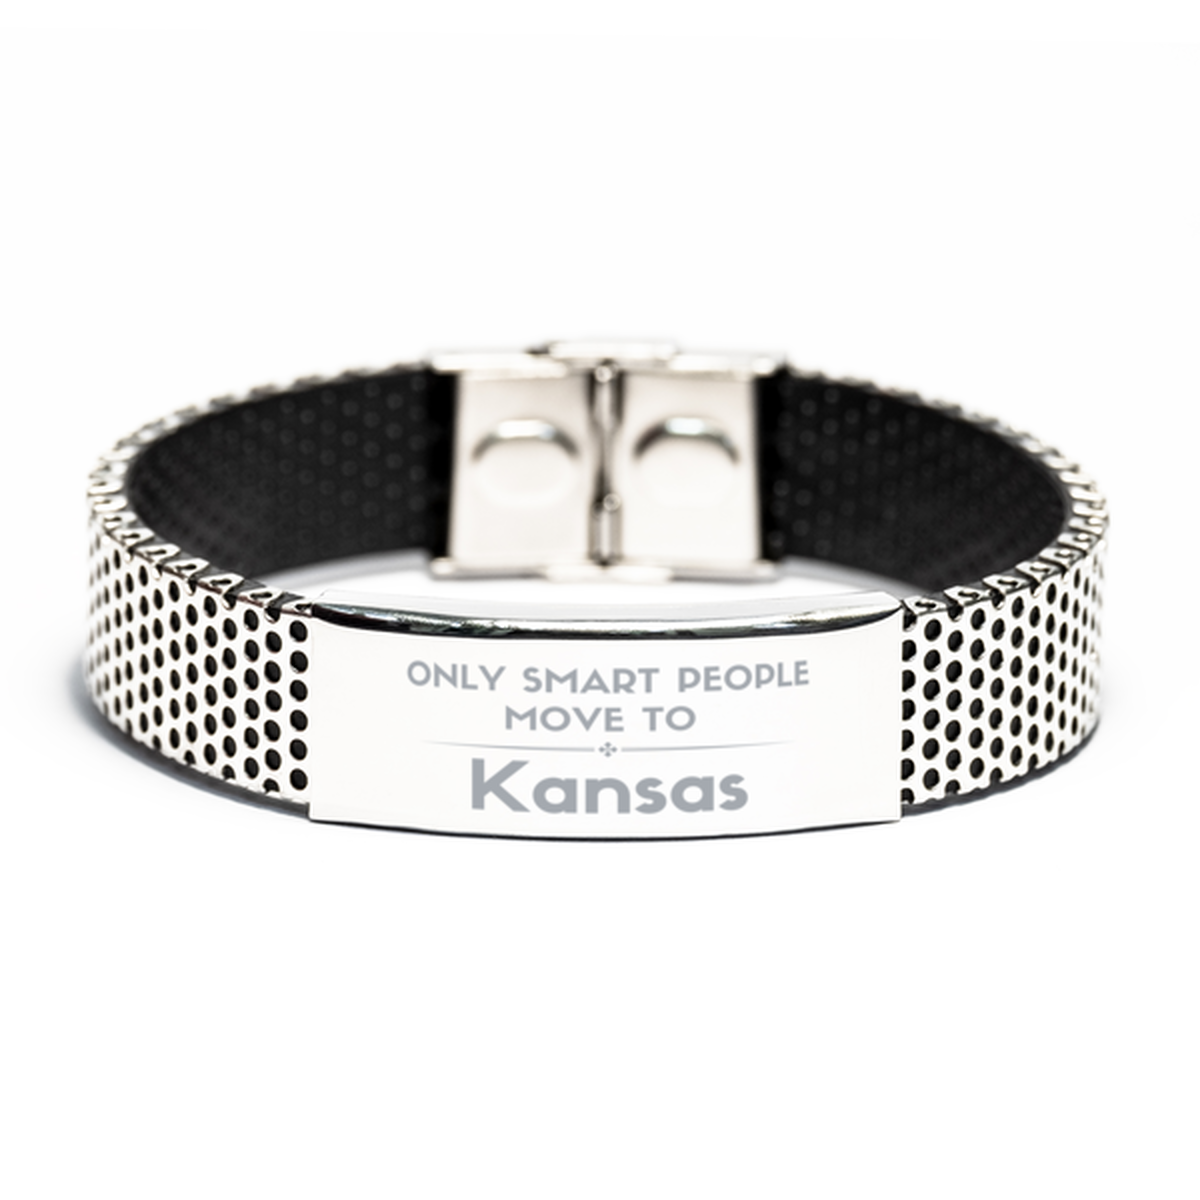 Only smart people move to Kansas Stainless Steel Bracelet, Gag Gifts For Kansas, Move to Kansas Gifts for Friends Coworker Funny Saying Quote